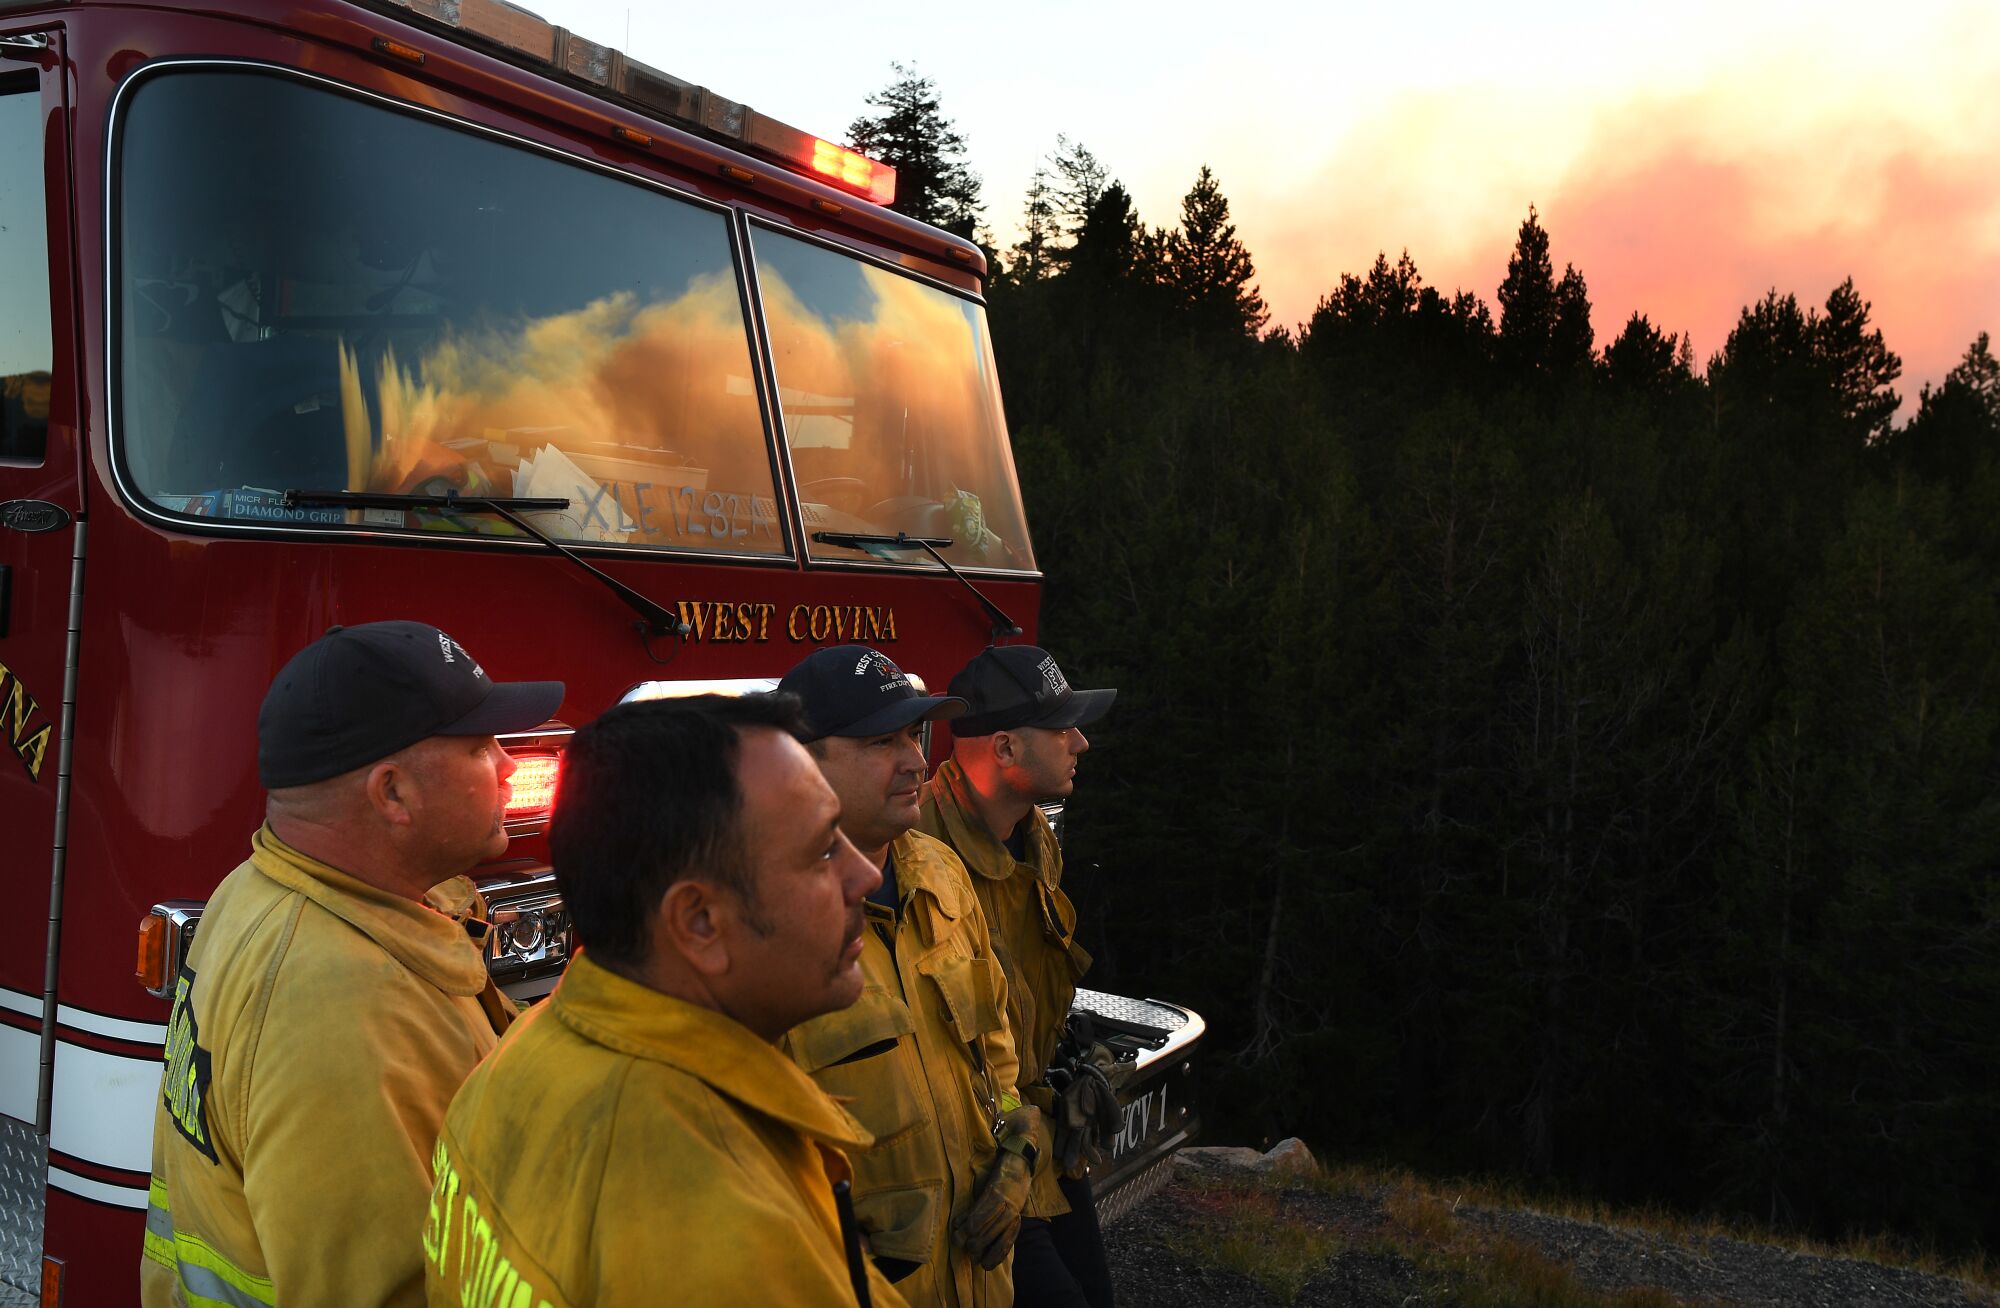 Firefighters stand in front of a firetruck and look toward a smoky sky.